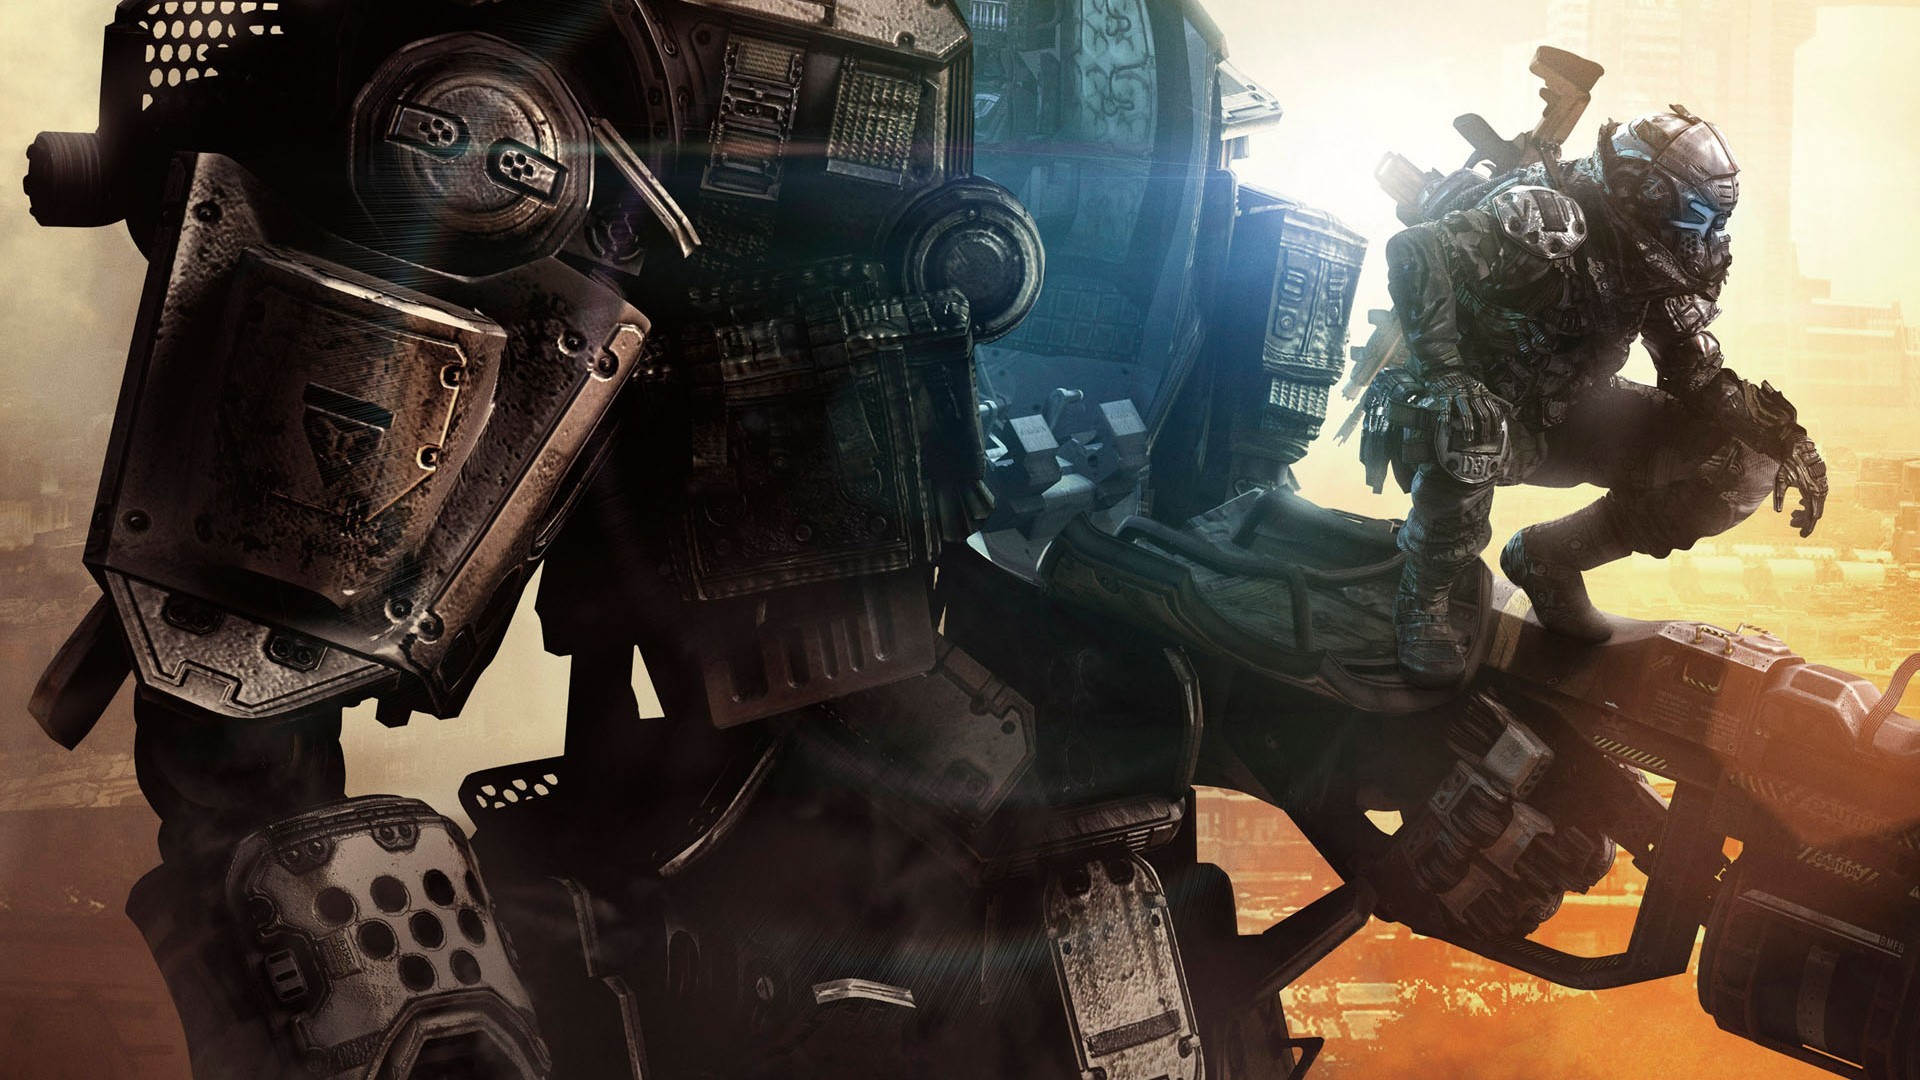 General 1920x1080 Titanfall mechs video games science fiction PC gaming video game art Respawn Entertainment